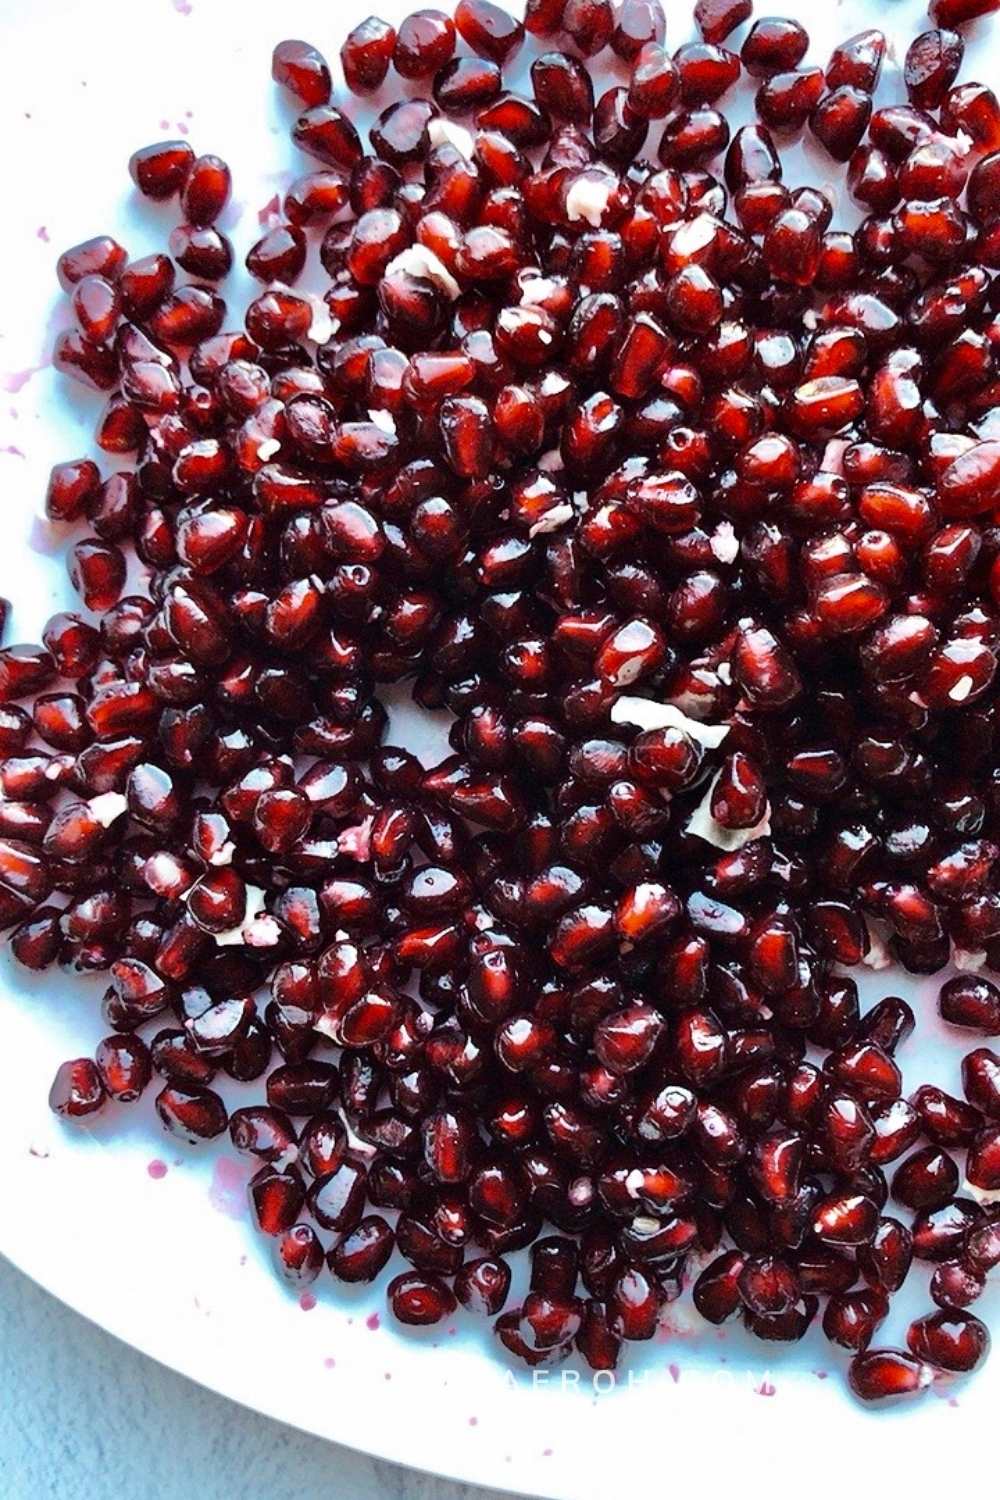 Pomegranate seeds can stain, so be careful not to allow them to burst everywhere. 